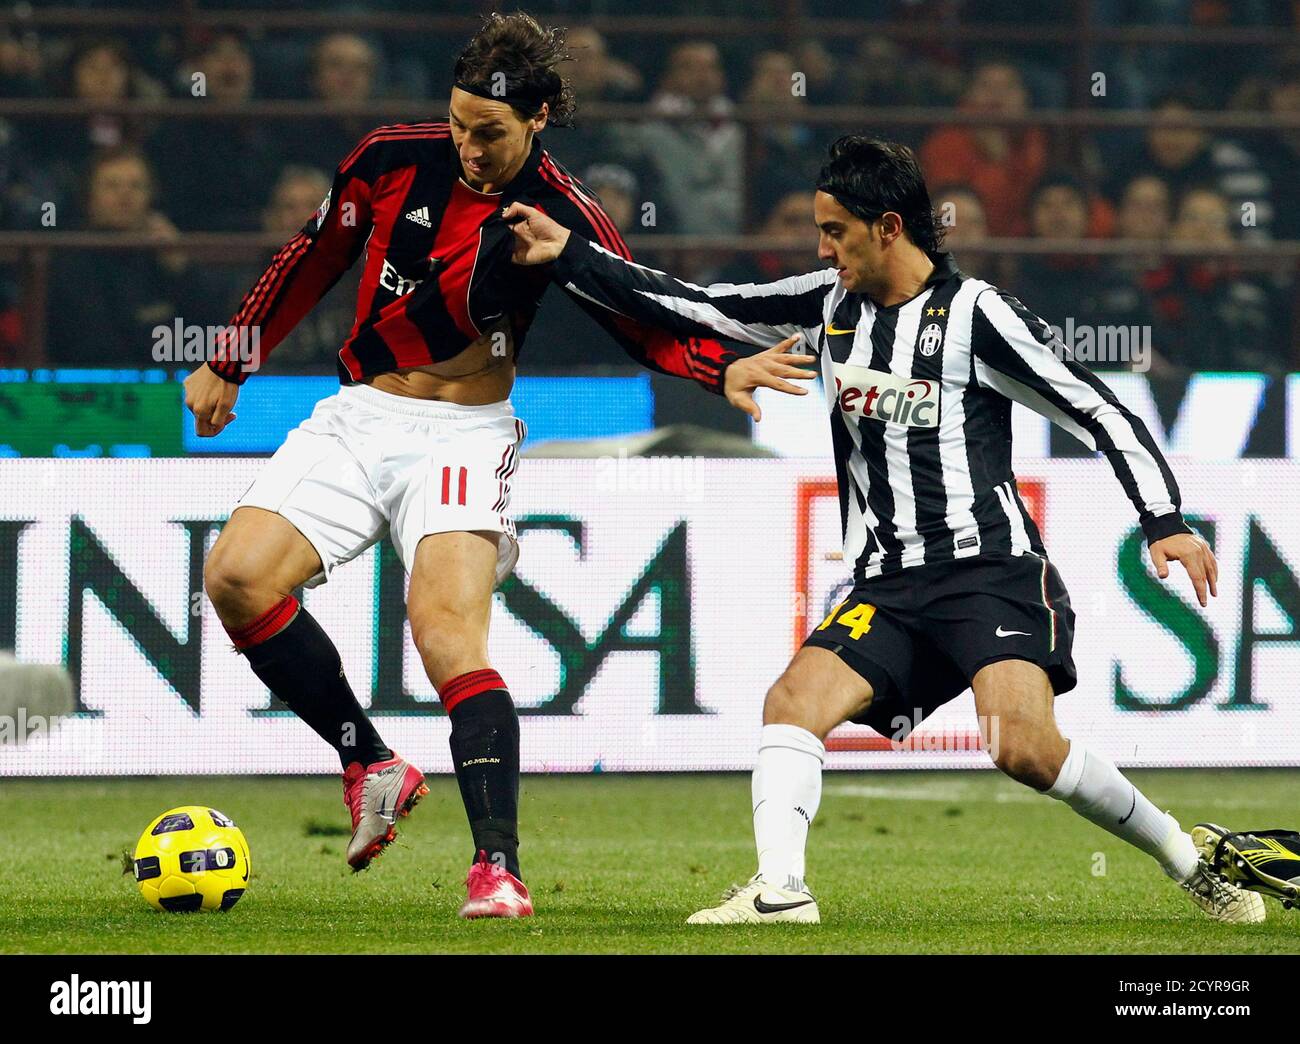 AC Milan's Zlatan Ibrahimovic (L) is challenged by Juventus' Alberto  Aquilani during their Italian Serie A soccer match at the San Siro stadium  in Milan October 30, 2010. REUTERS/Giampiero Sposito (ITALY -